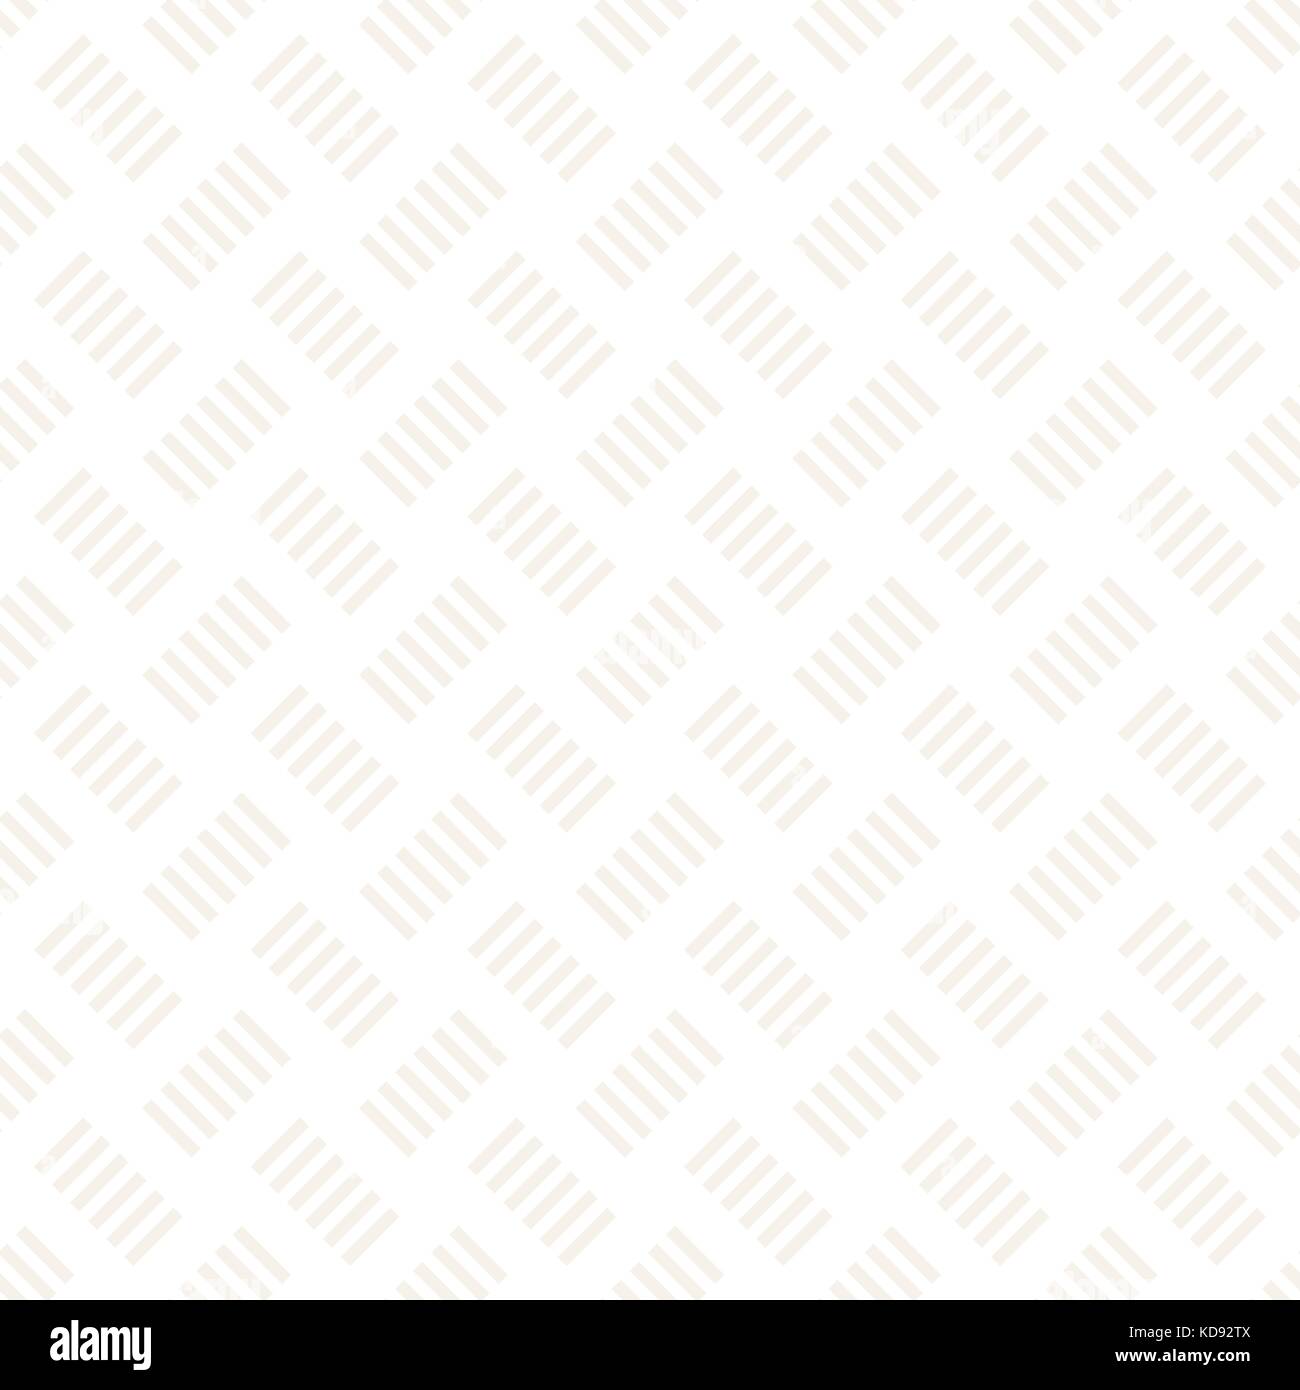 Crosshatch vector seamless geometric pattern. Crossed graphic rectangles background. Checkered motif. Seamless subtle texture of crosshatched lines. Trellis simple fabric print. Stock Vector